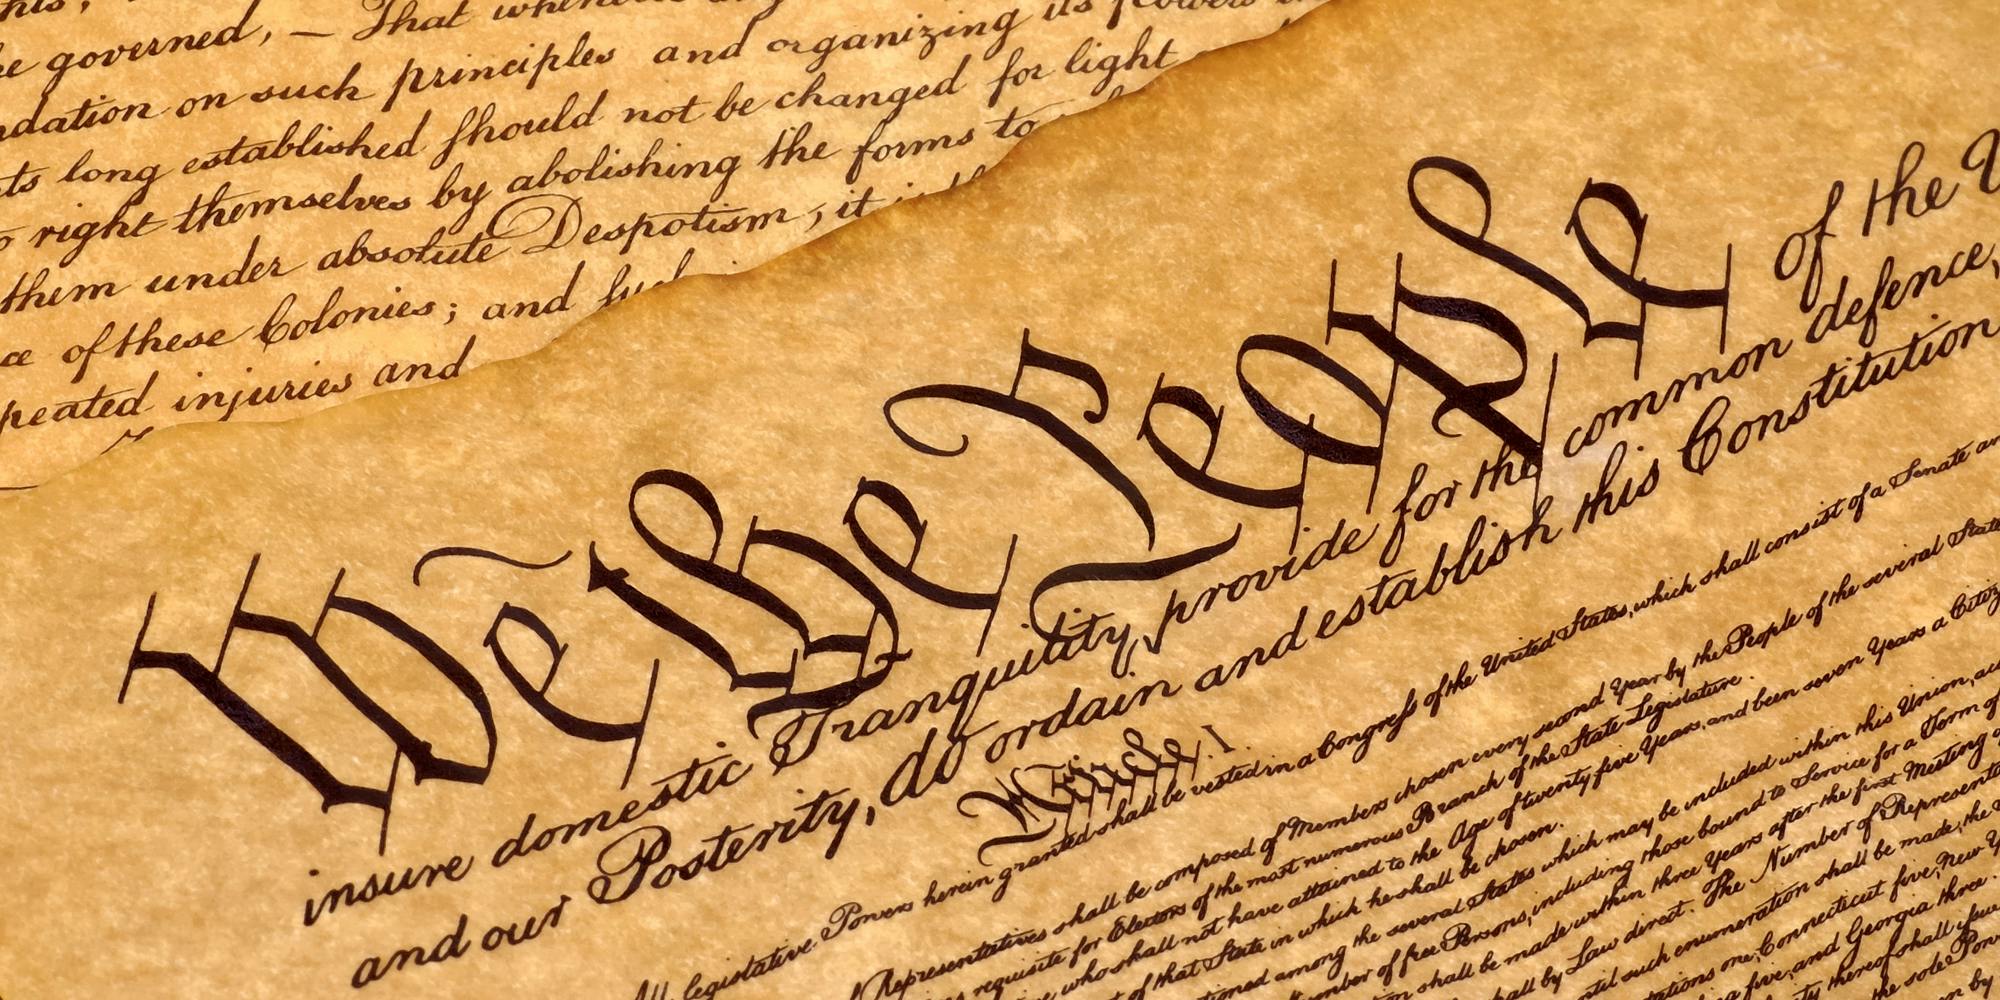 United States Constitution "We The People"